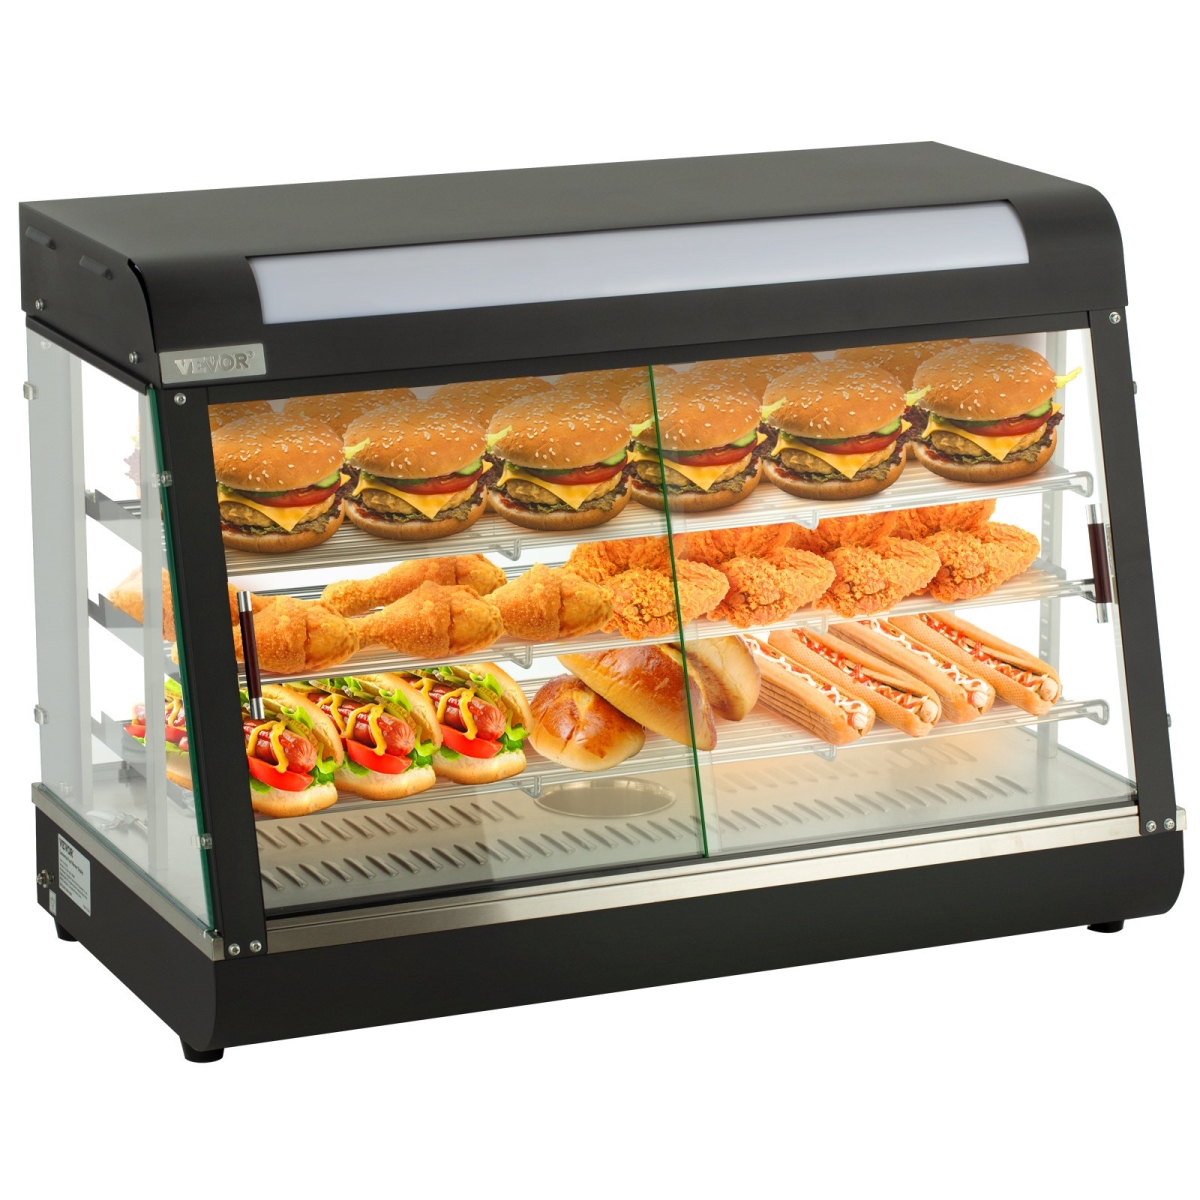 Picture of Vevor SPBWJCYTGPQGHGAZGV1 3-Tier Commercial Food Warmer Countertop Pizza Cabinet with Water Tray